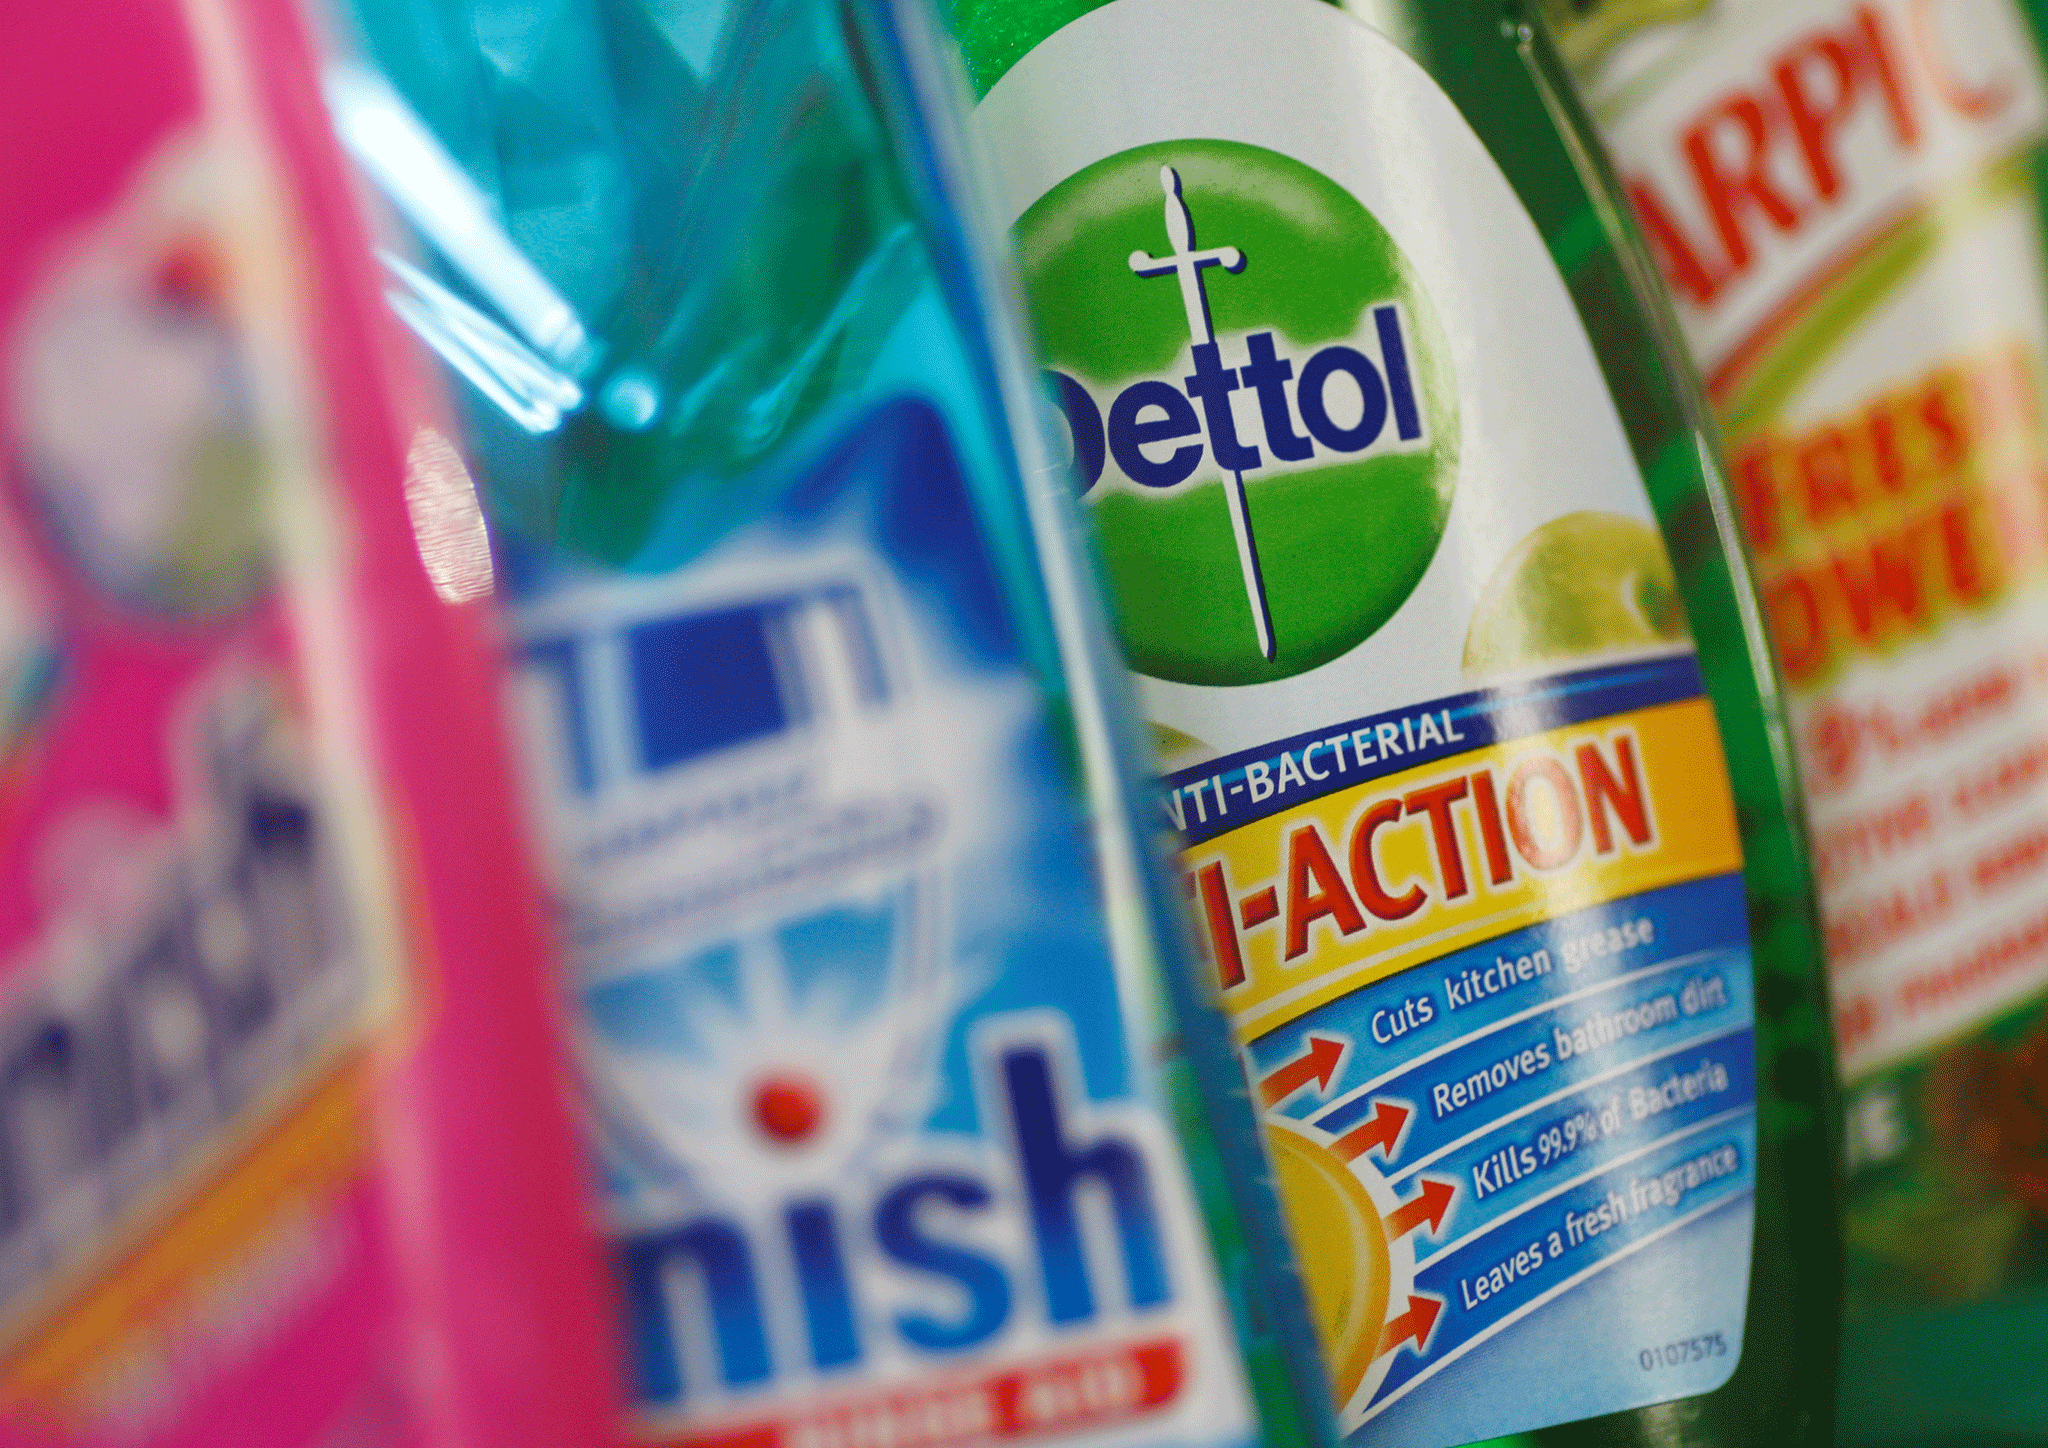 Reckitt Benckiser: Consumer products group still trying to clean up after malware attack